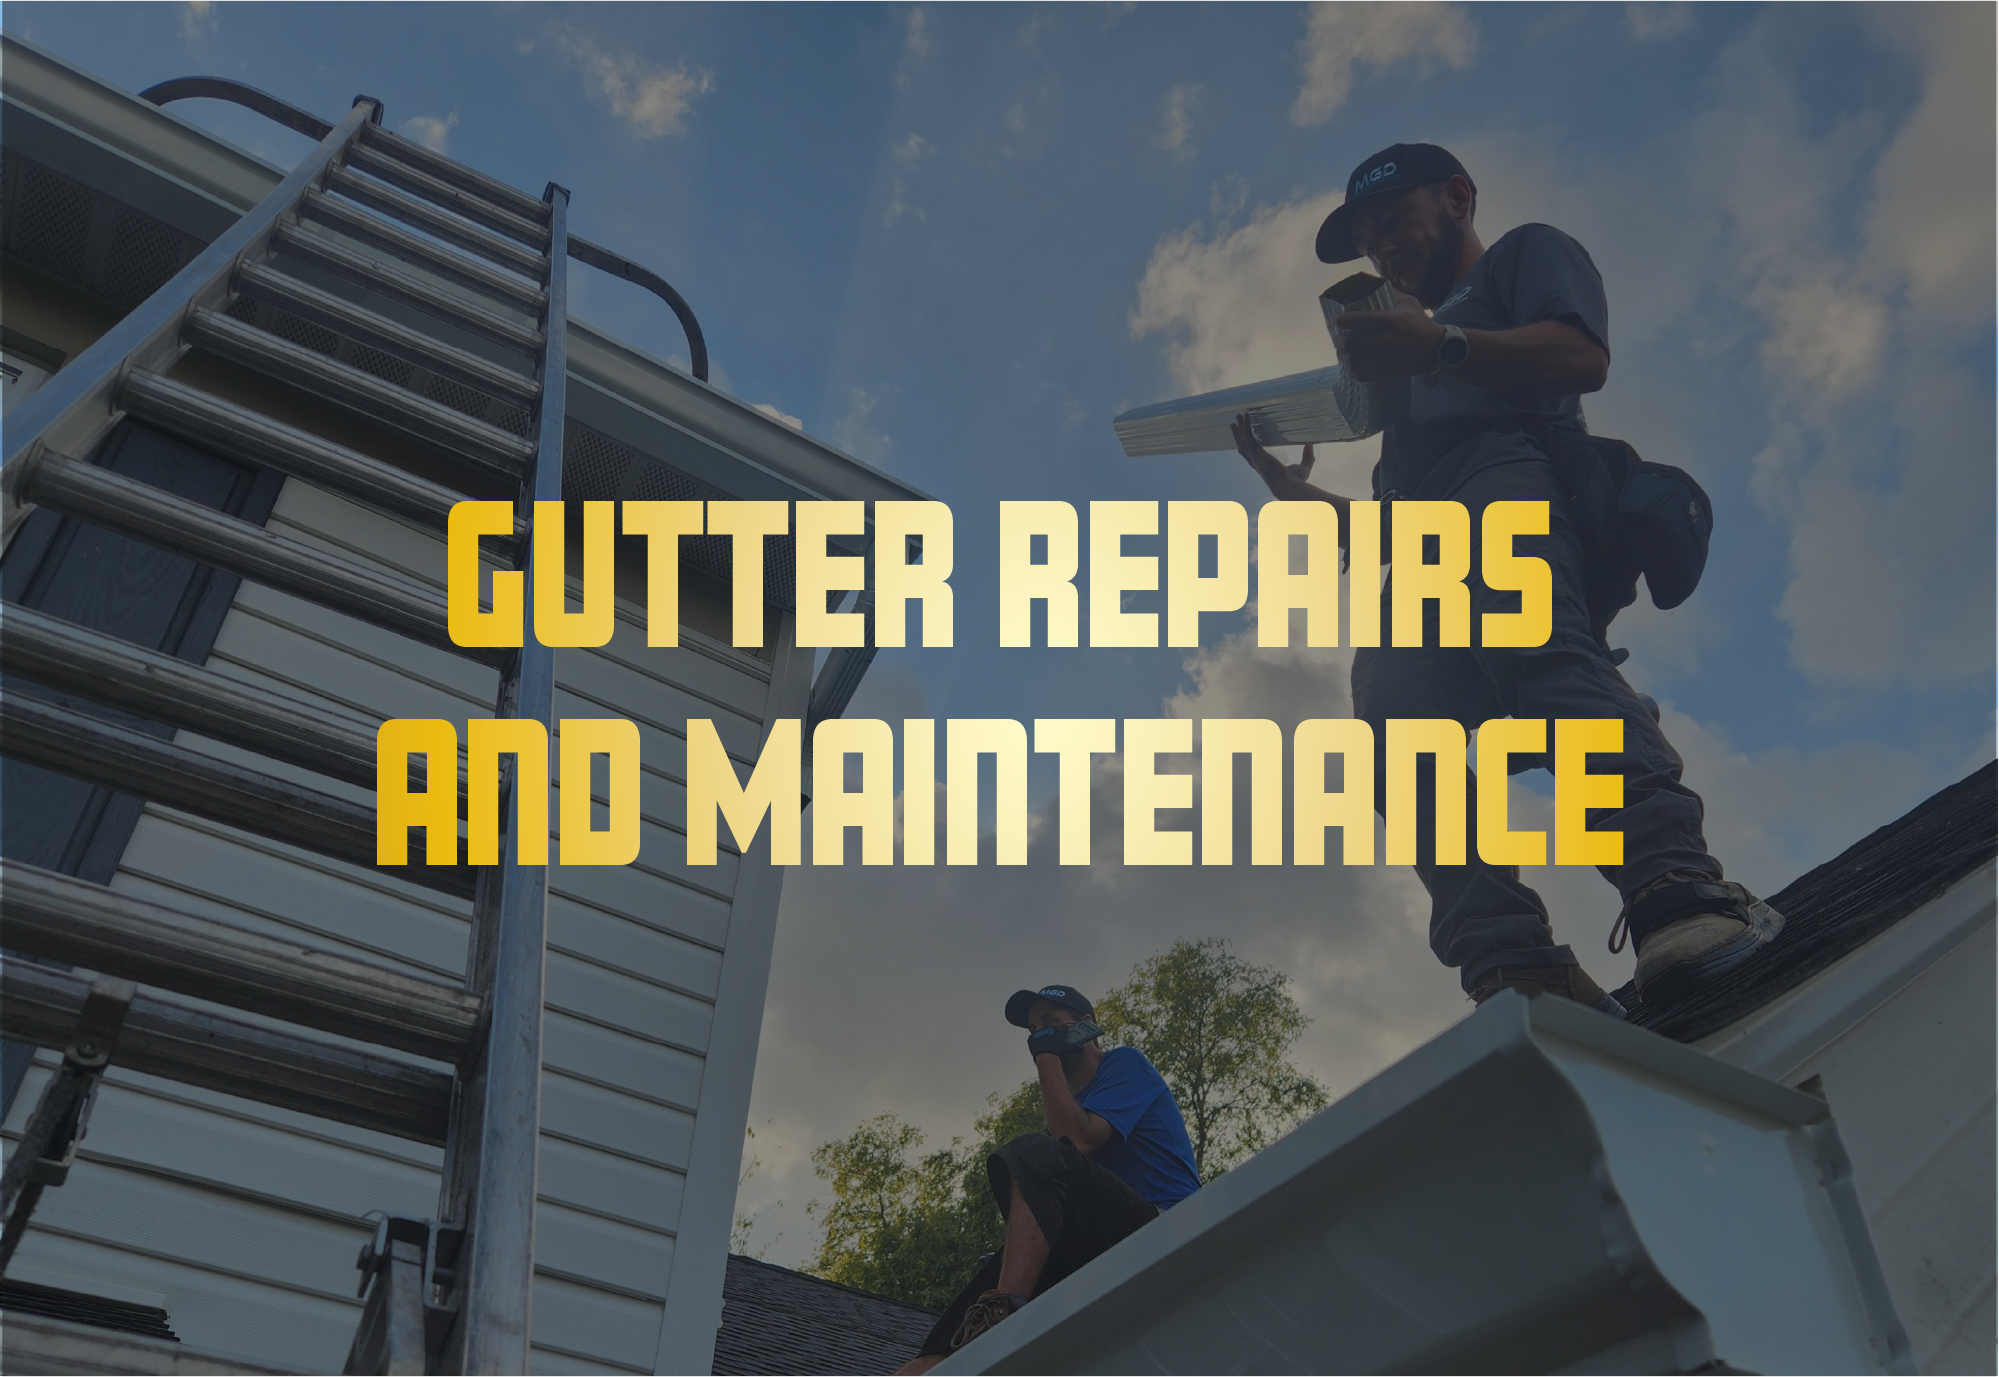 gutter repairs and maintenance home page link